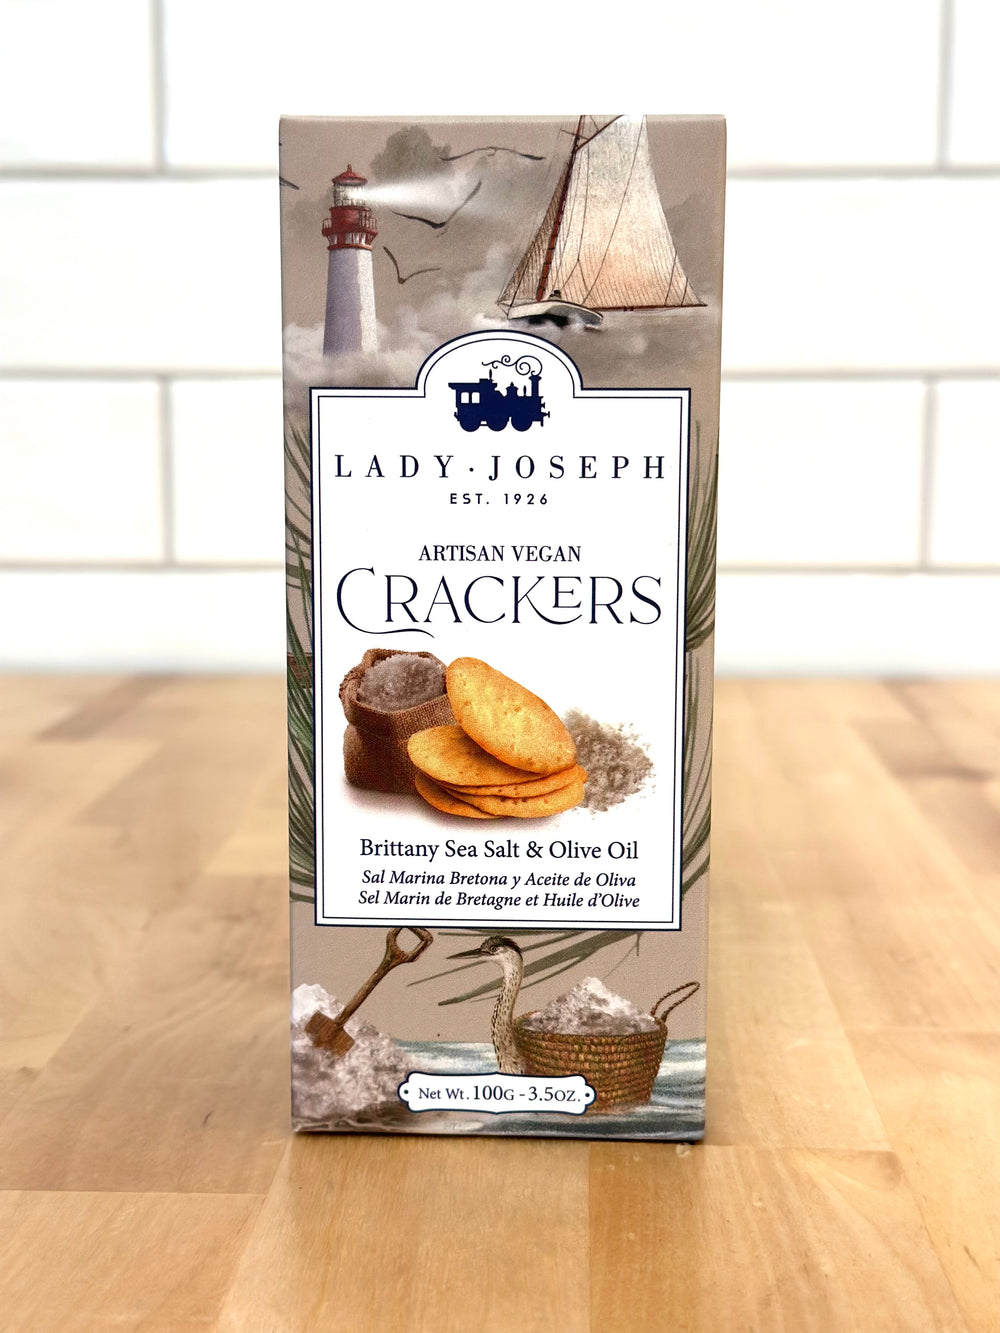 LADY JOSEPH Artisan Vegan Crackers with Brittany Sea Salt and Olive Oil